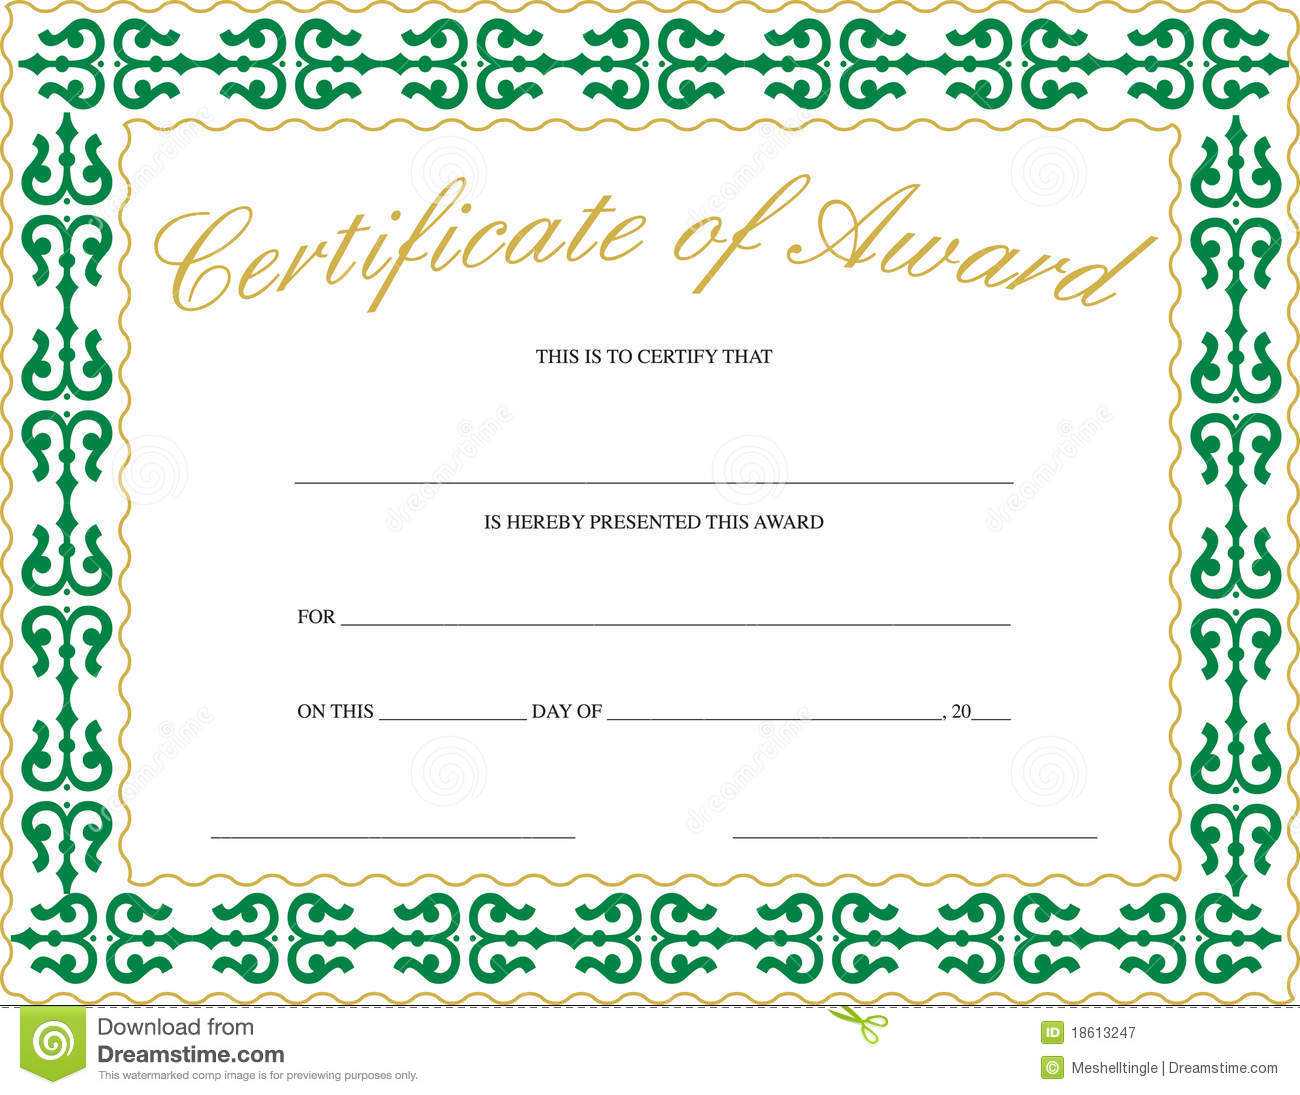 Certificate Of Award Stock Vector. Illustration Of Paper With Generic Certificate Template